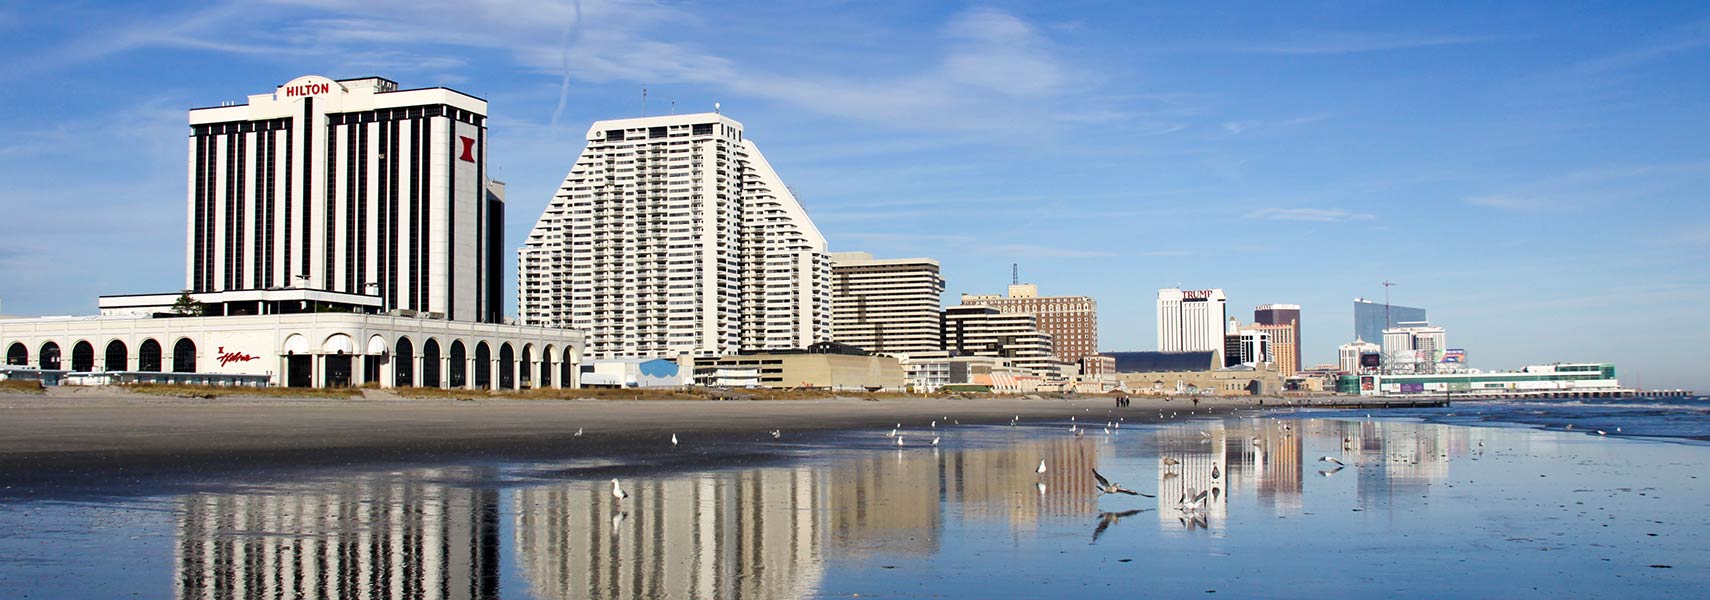 Casinos reflected on the sand in Atlantic City, NJ